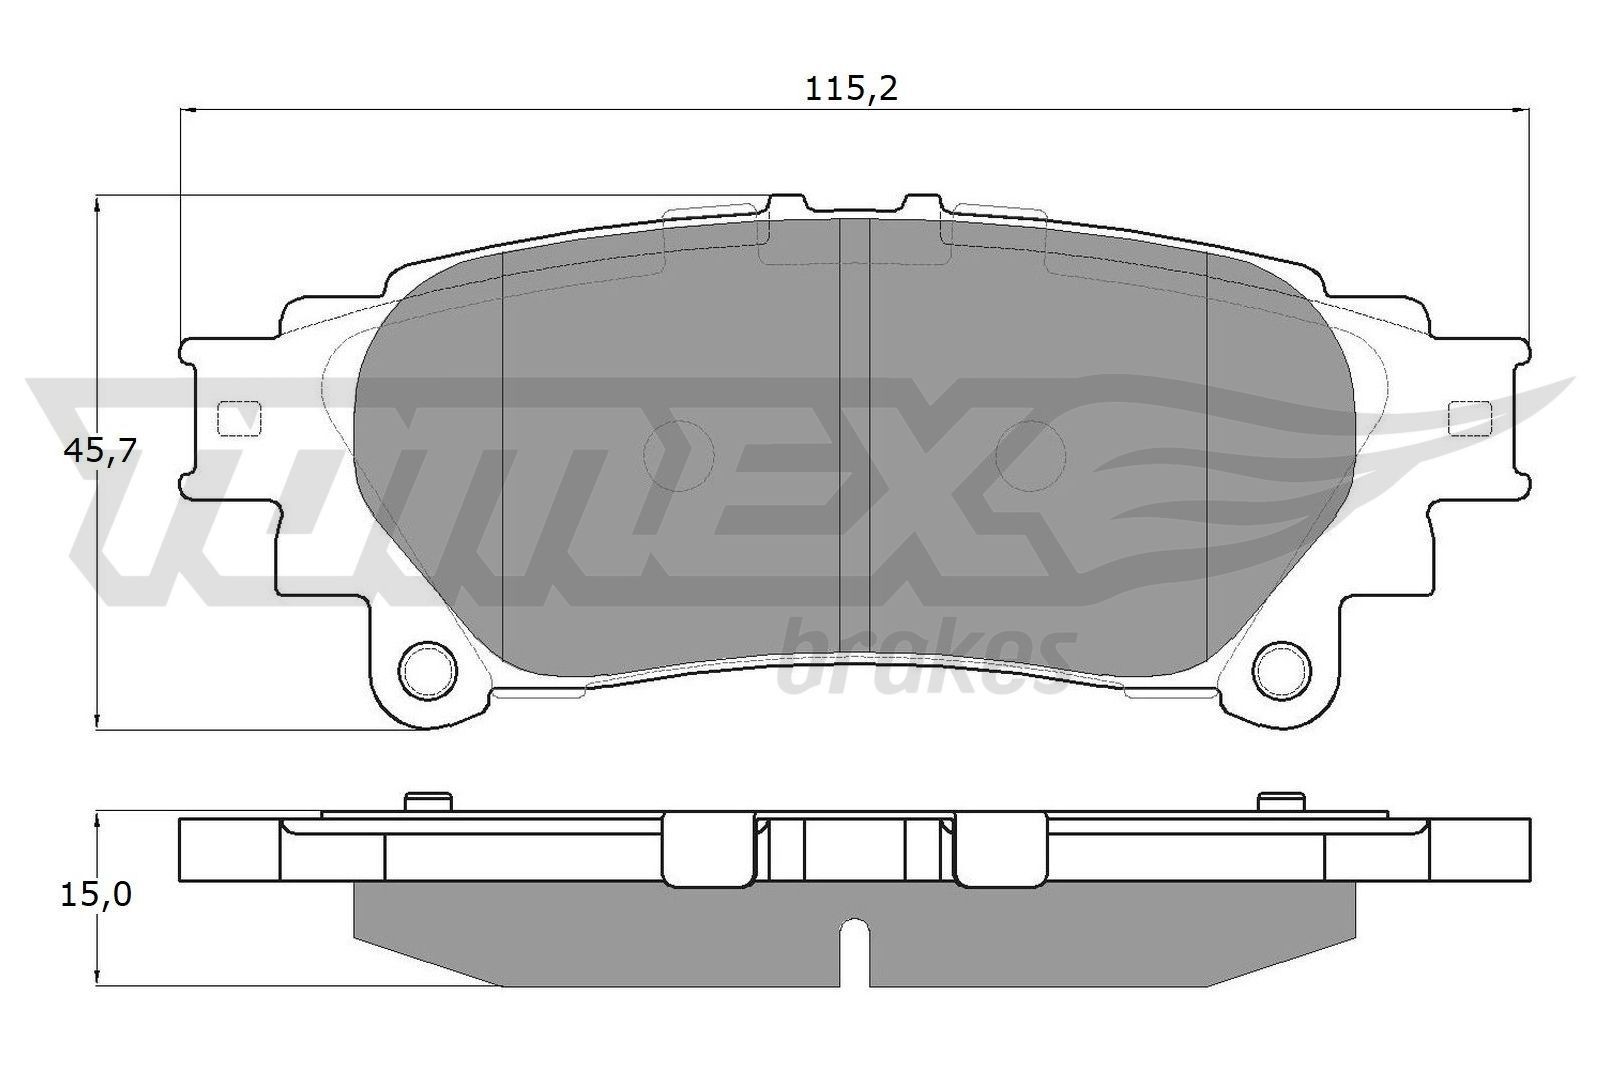 18-40 TOMEX brakes Rear Axle, not prepared for wear indicator Height: 45,7mm, Width: 115,2mm, Thickness: 15mm Brake pads TX 18-40 buy